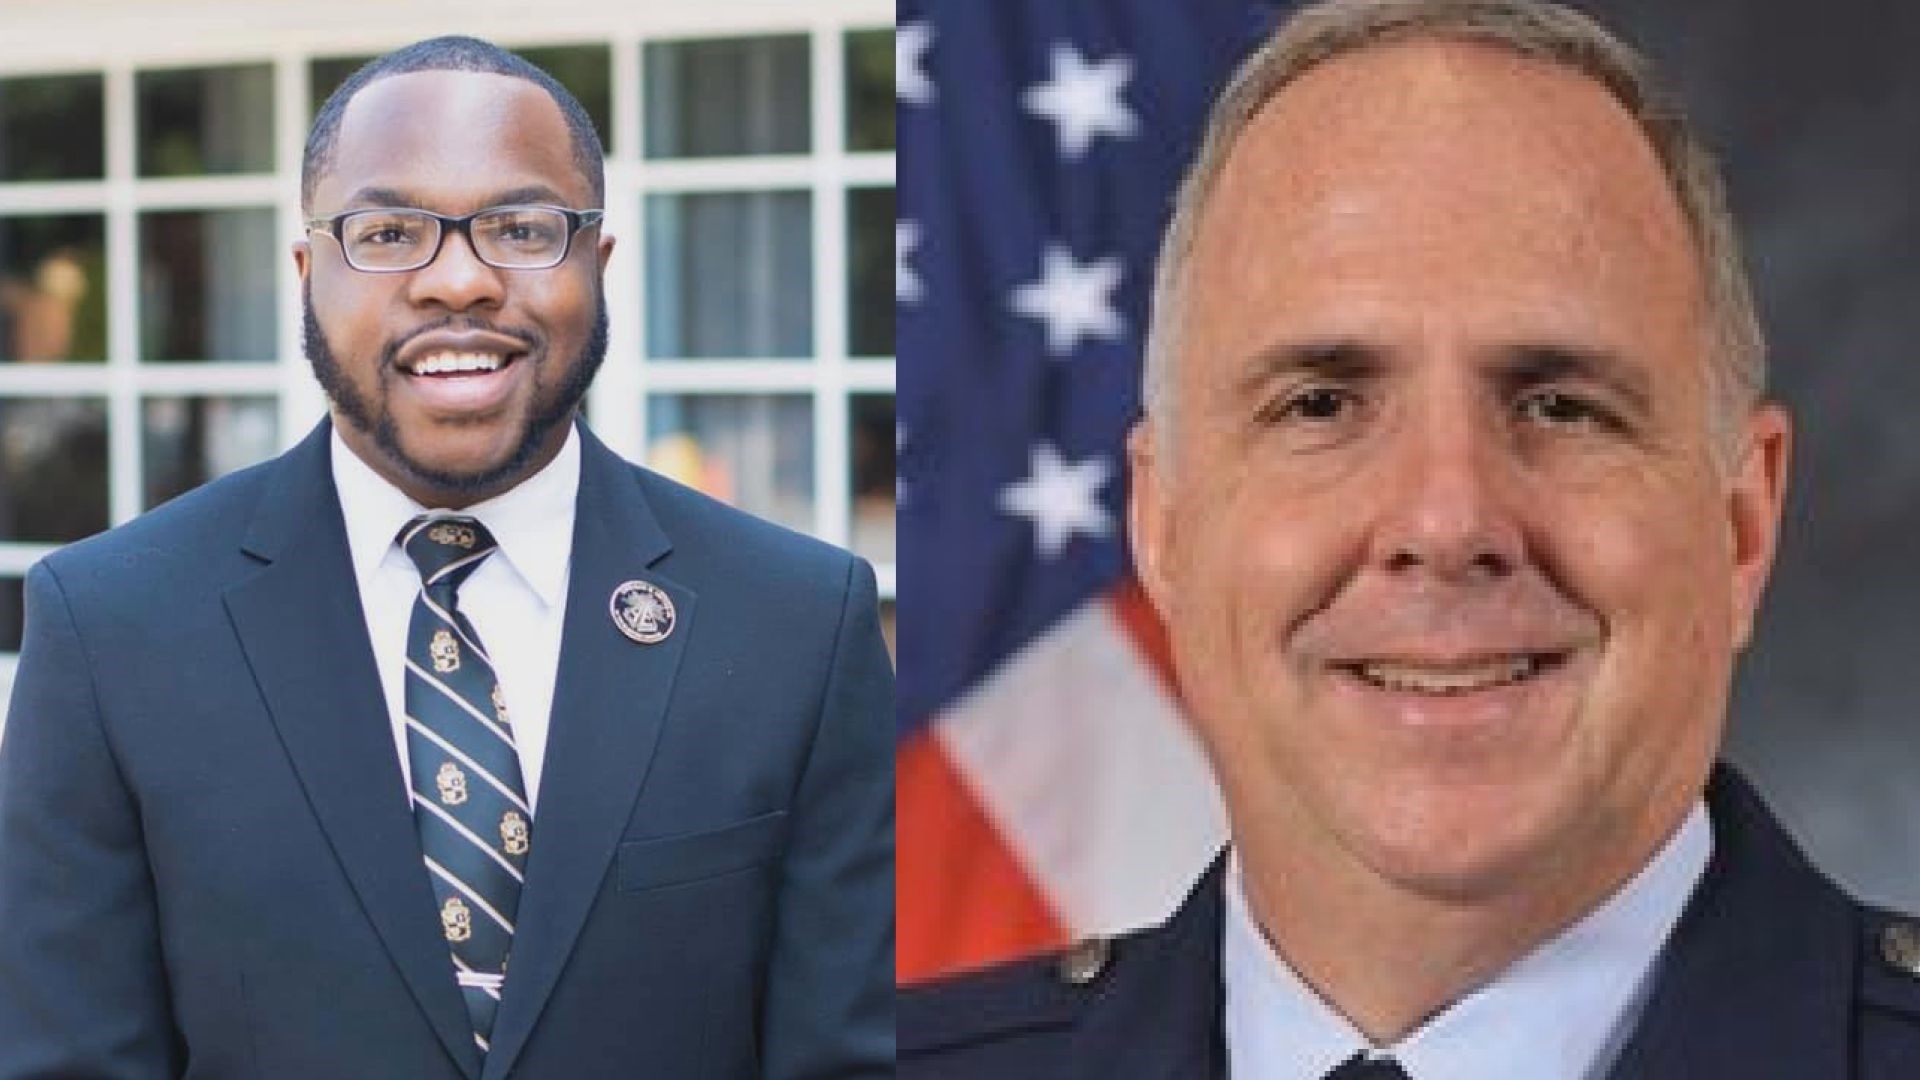 Pre-college counselor Juawn Jackson and retired educator and Air Force colonel David Sumrall hope to carry out their missions as the new representative.